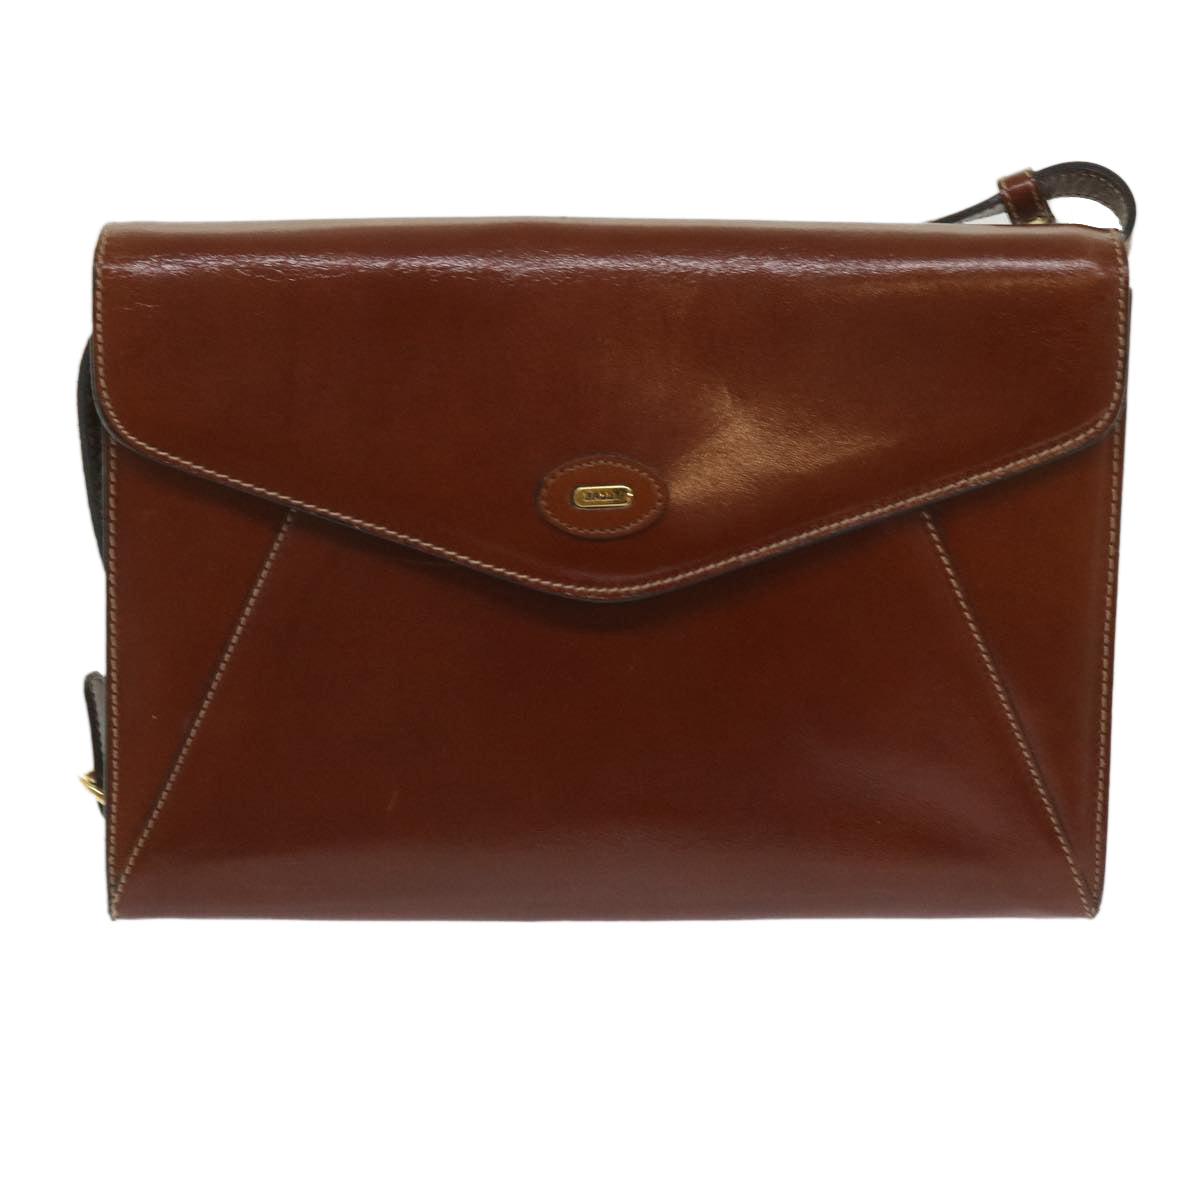 BALLY Shoulder Bag Leather Brown Auth 66086